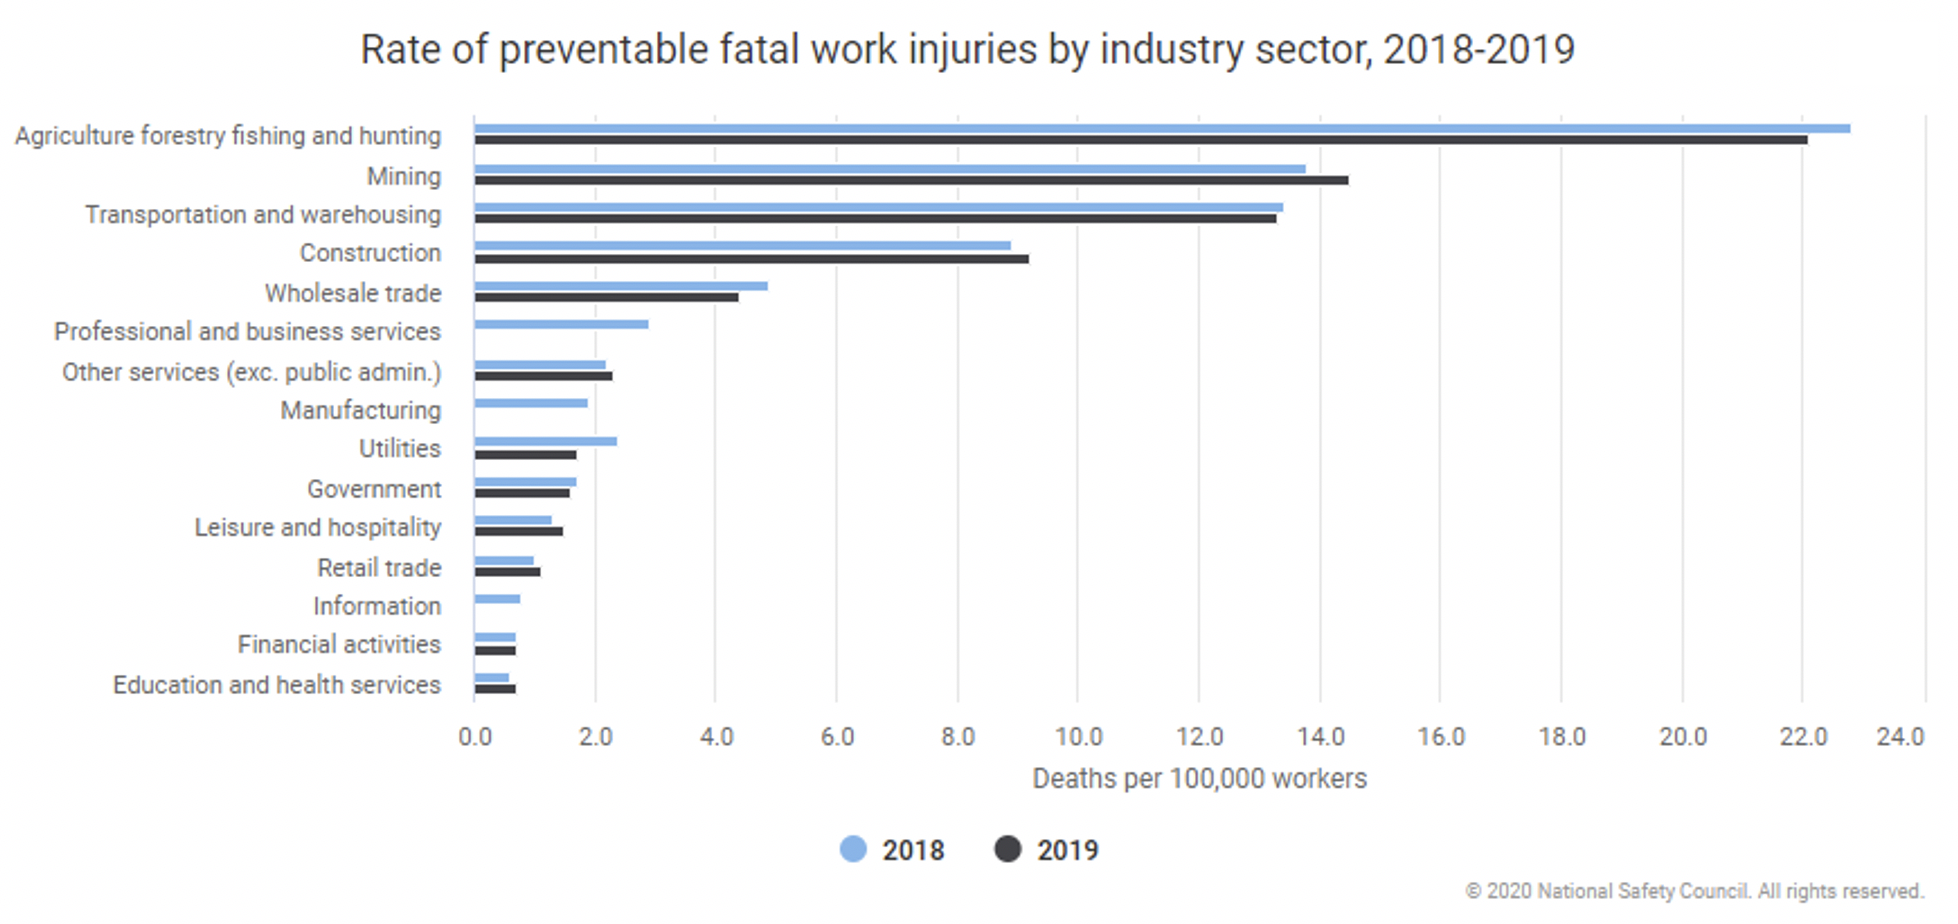 Preventable work injuries per sector